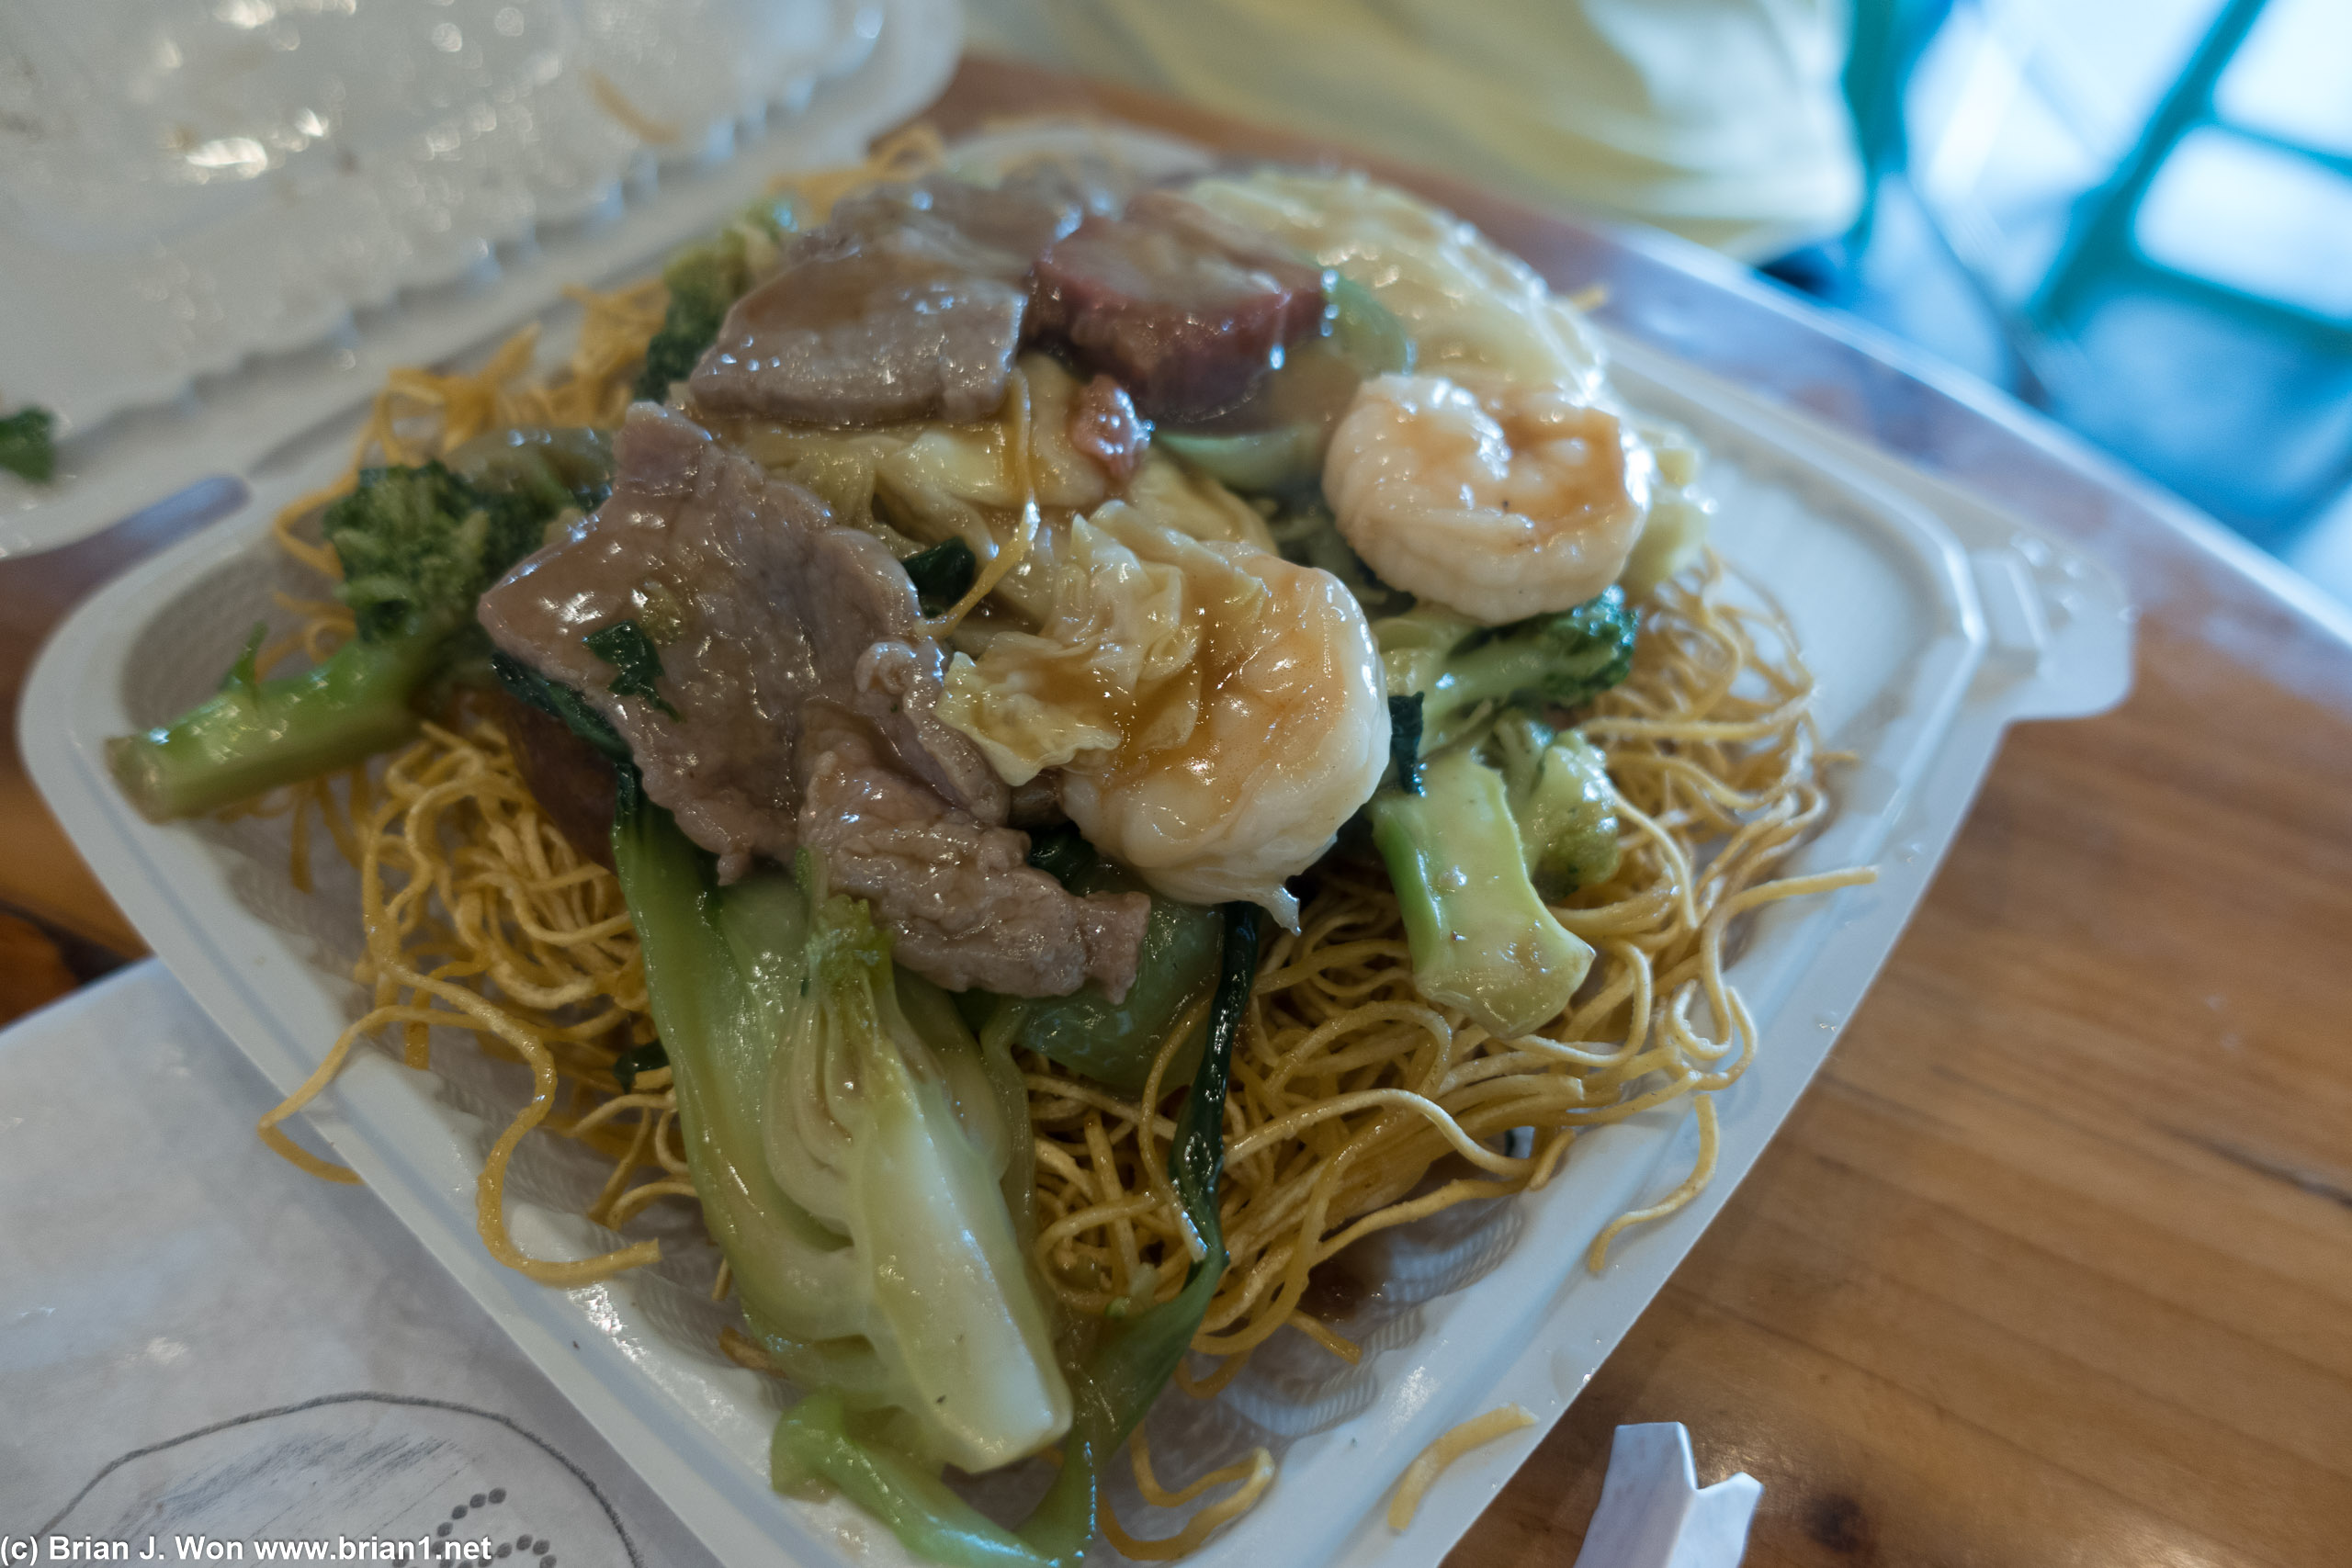 Pearl went for the classic Hong Kong style chow mein. Yum!